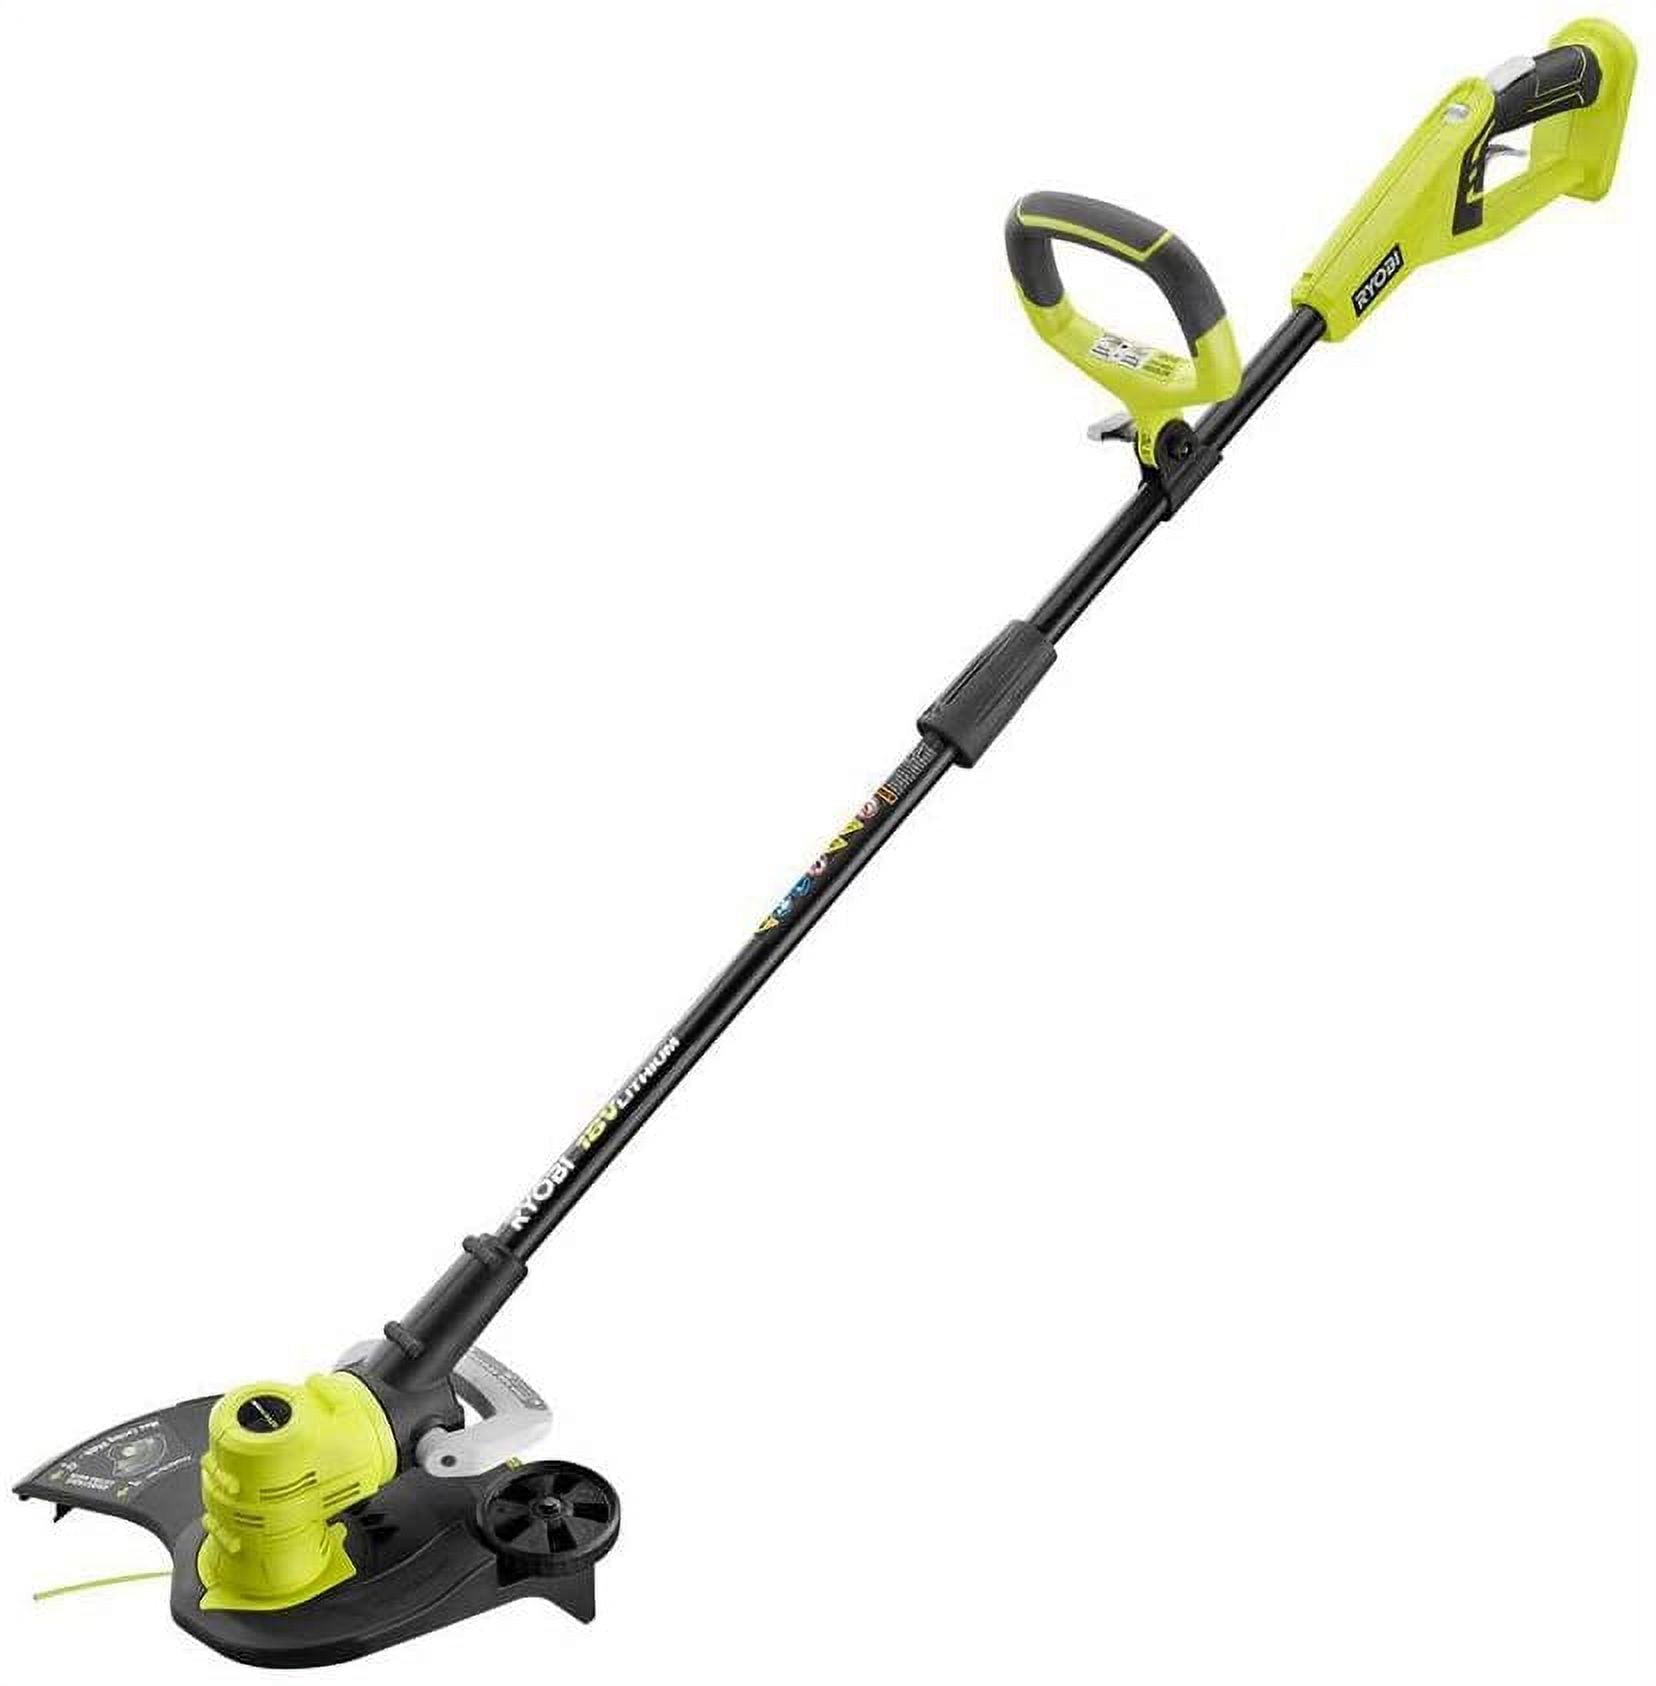 Ryobi One+ 18V Cordless Garden Vacuum and Sweeper R18XBLV20 - Tool